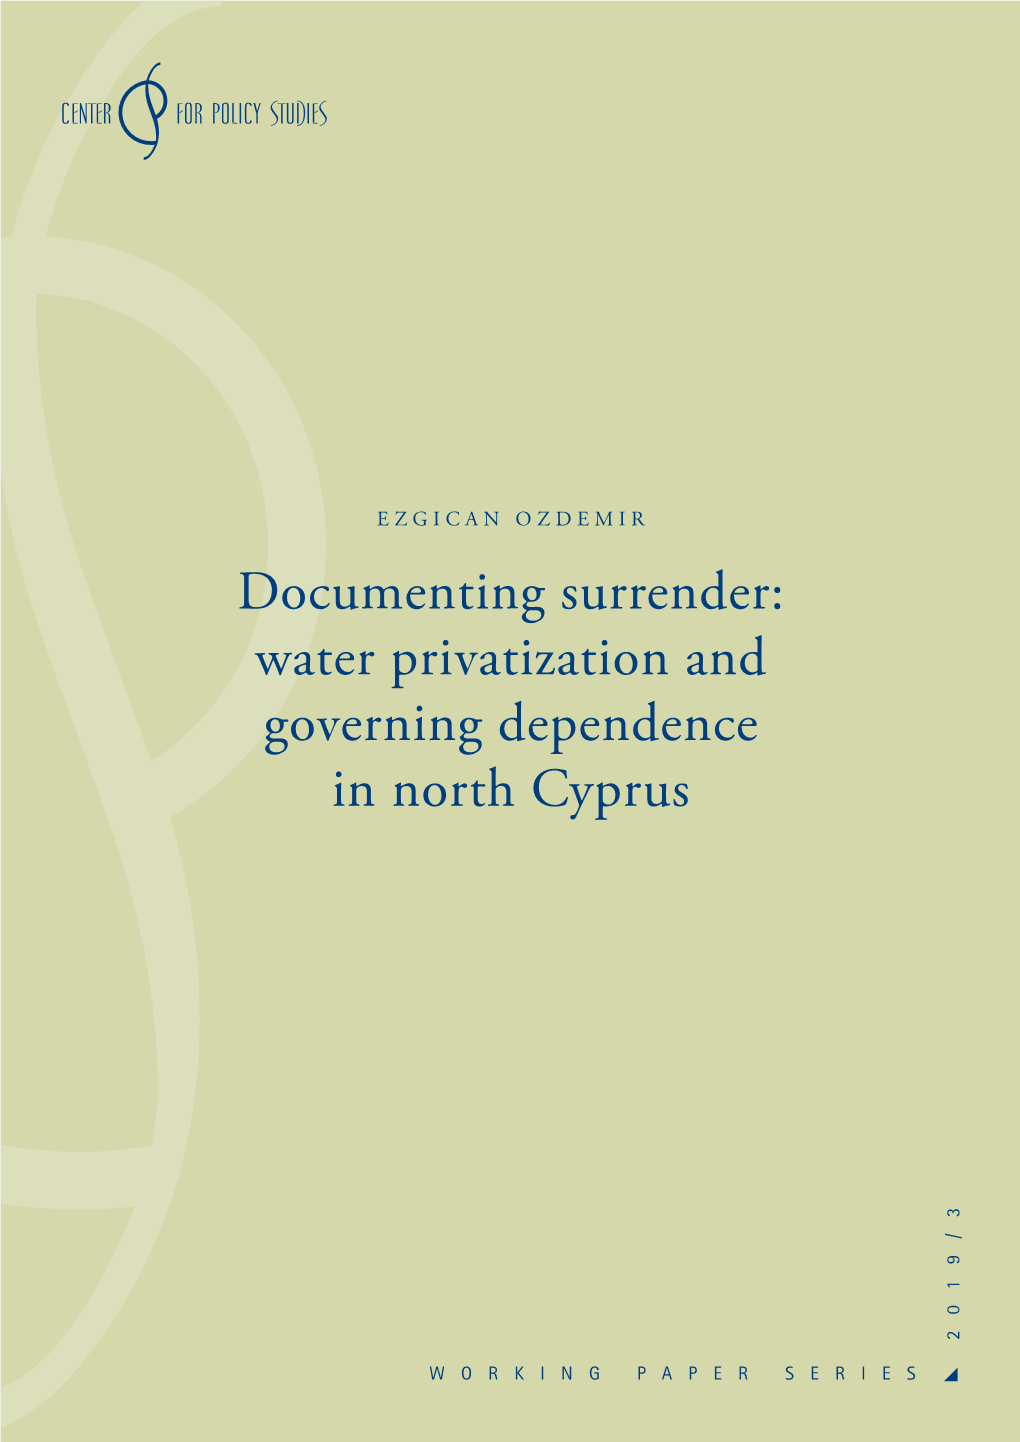 Water Privatization and Governing Dependence in North Cyprus 2019/3